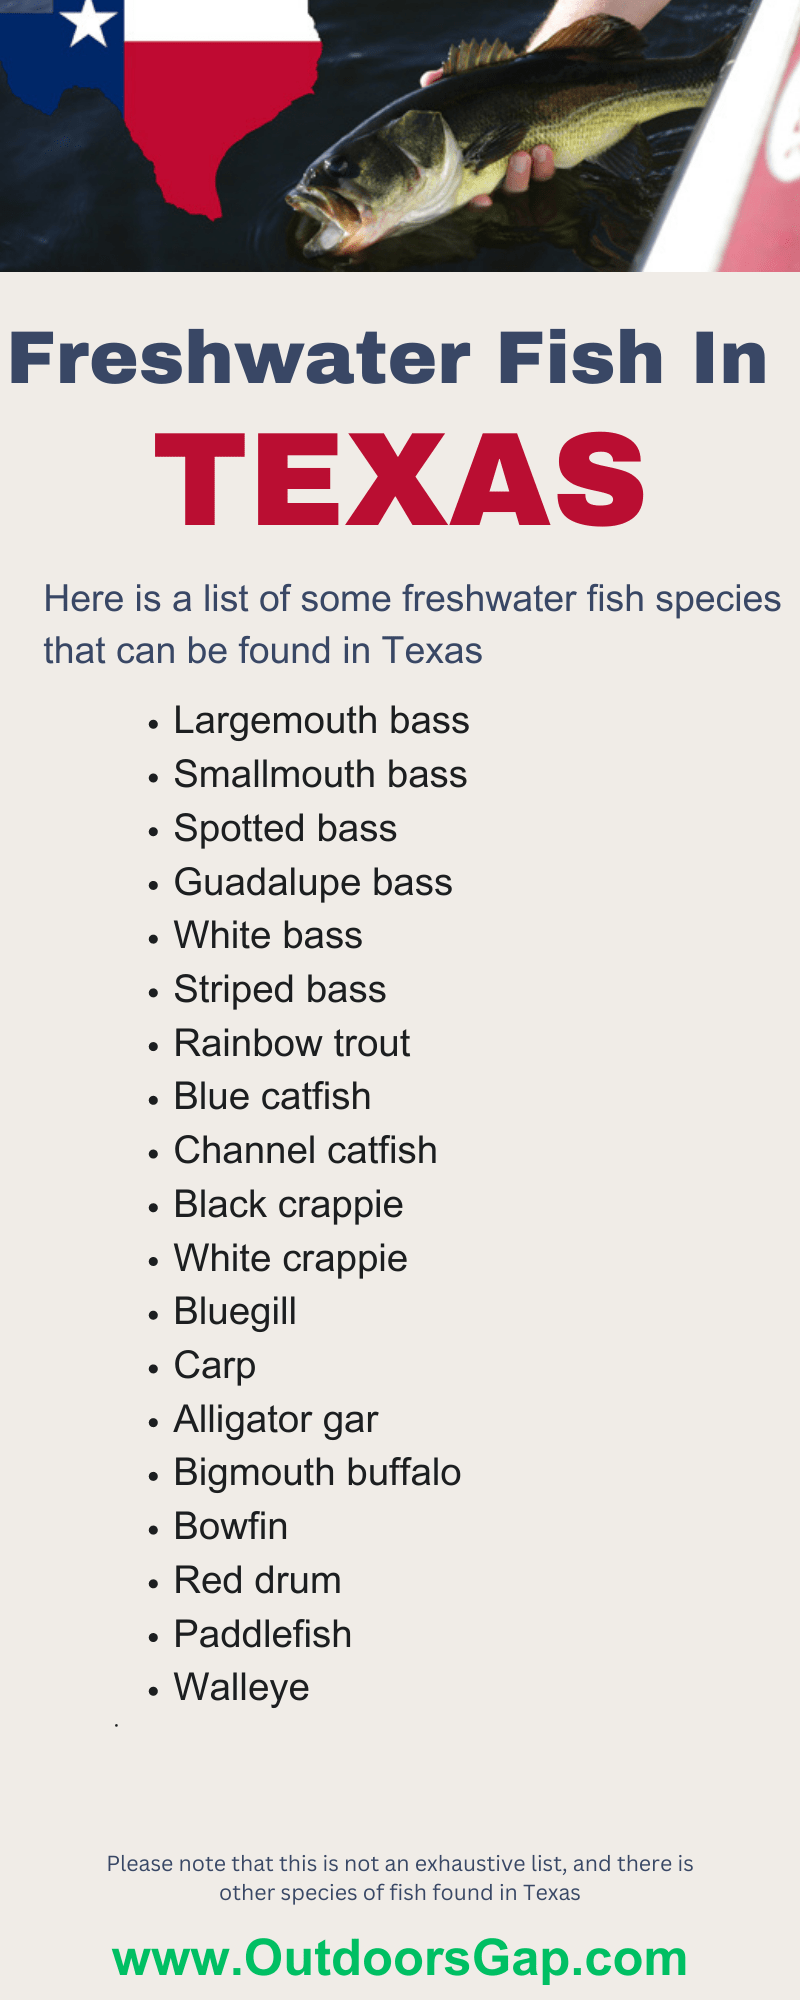 Freshwater fish found in Texas.